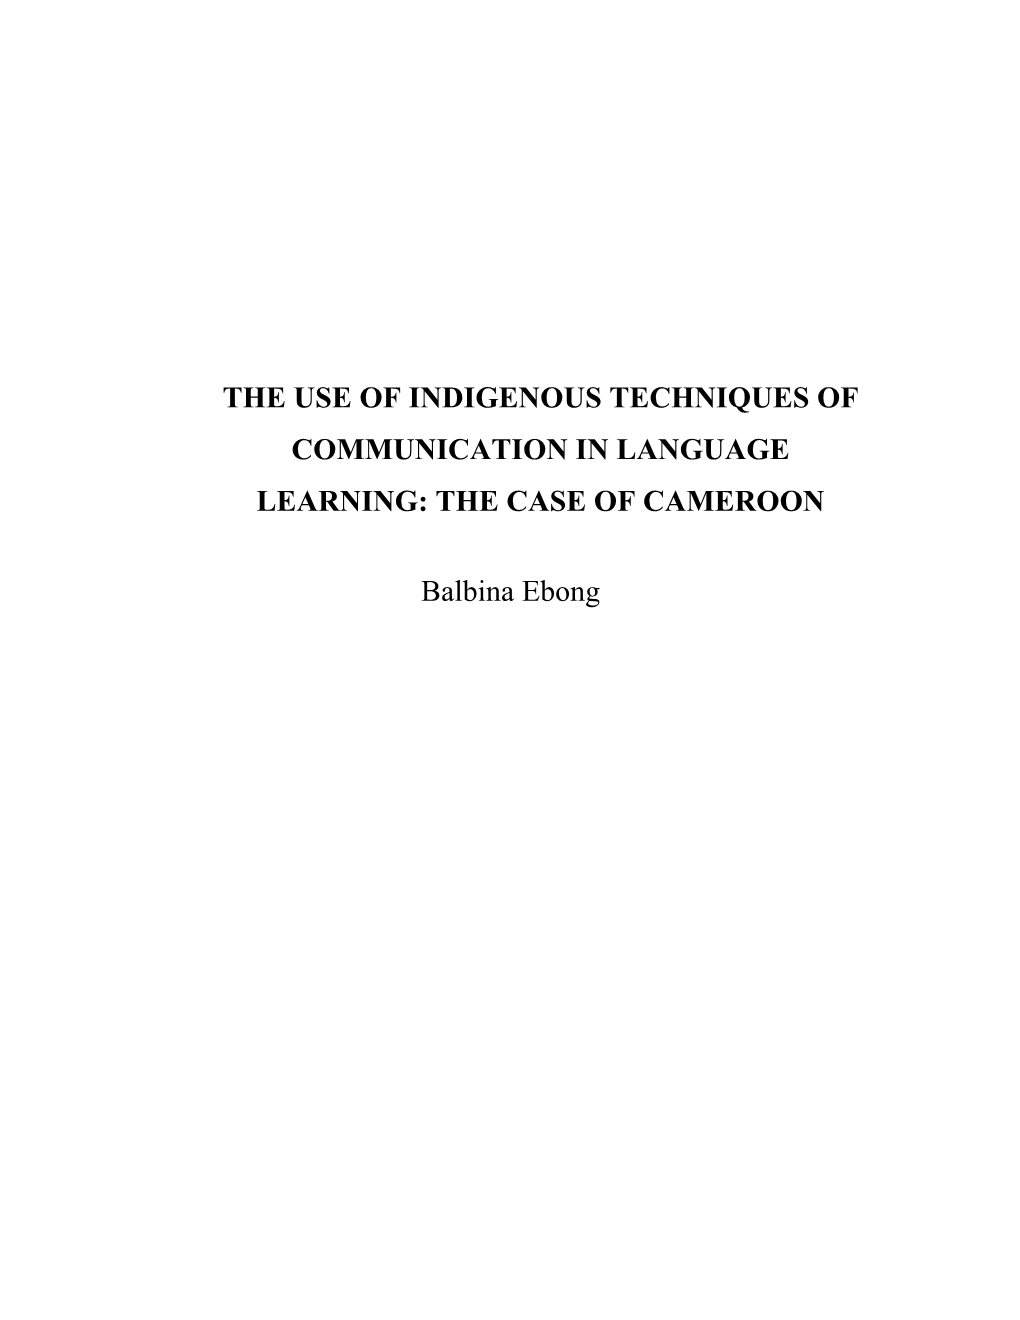 The Use of Indigenous Techniques of Communication in Language Learning: the Case of Cameroon